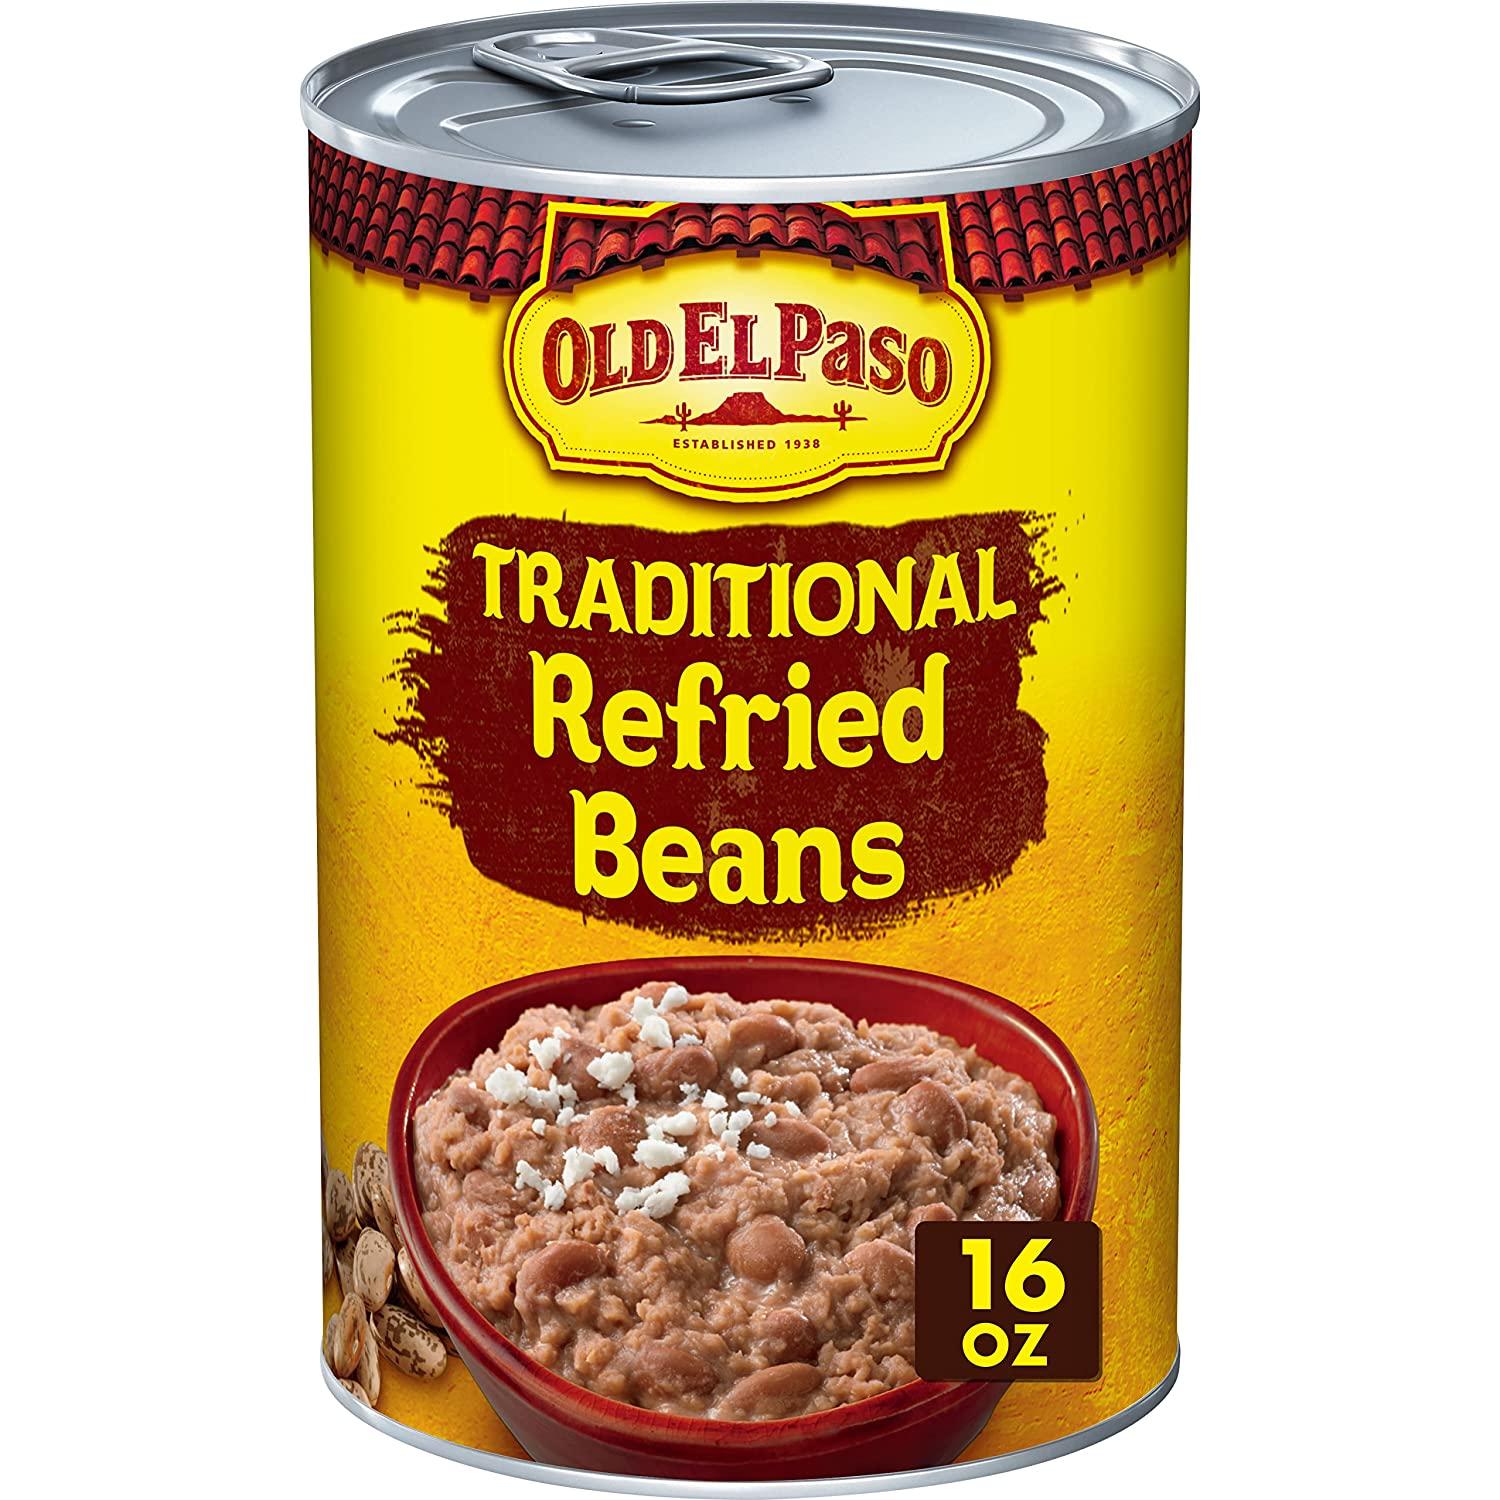 Old El Paso Traditional Refried Beans 12 Cans for $11.61 Shipped